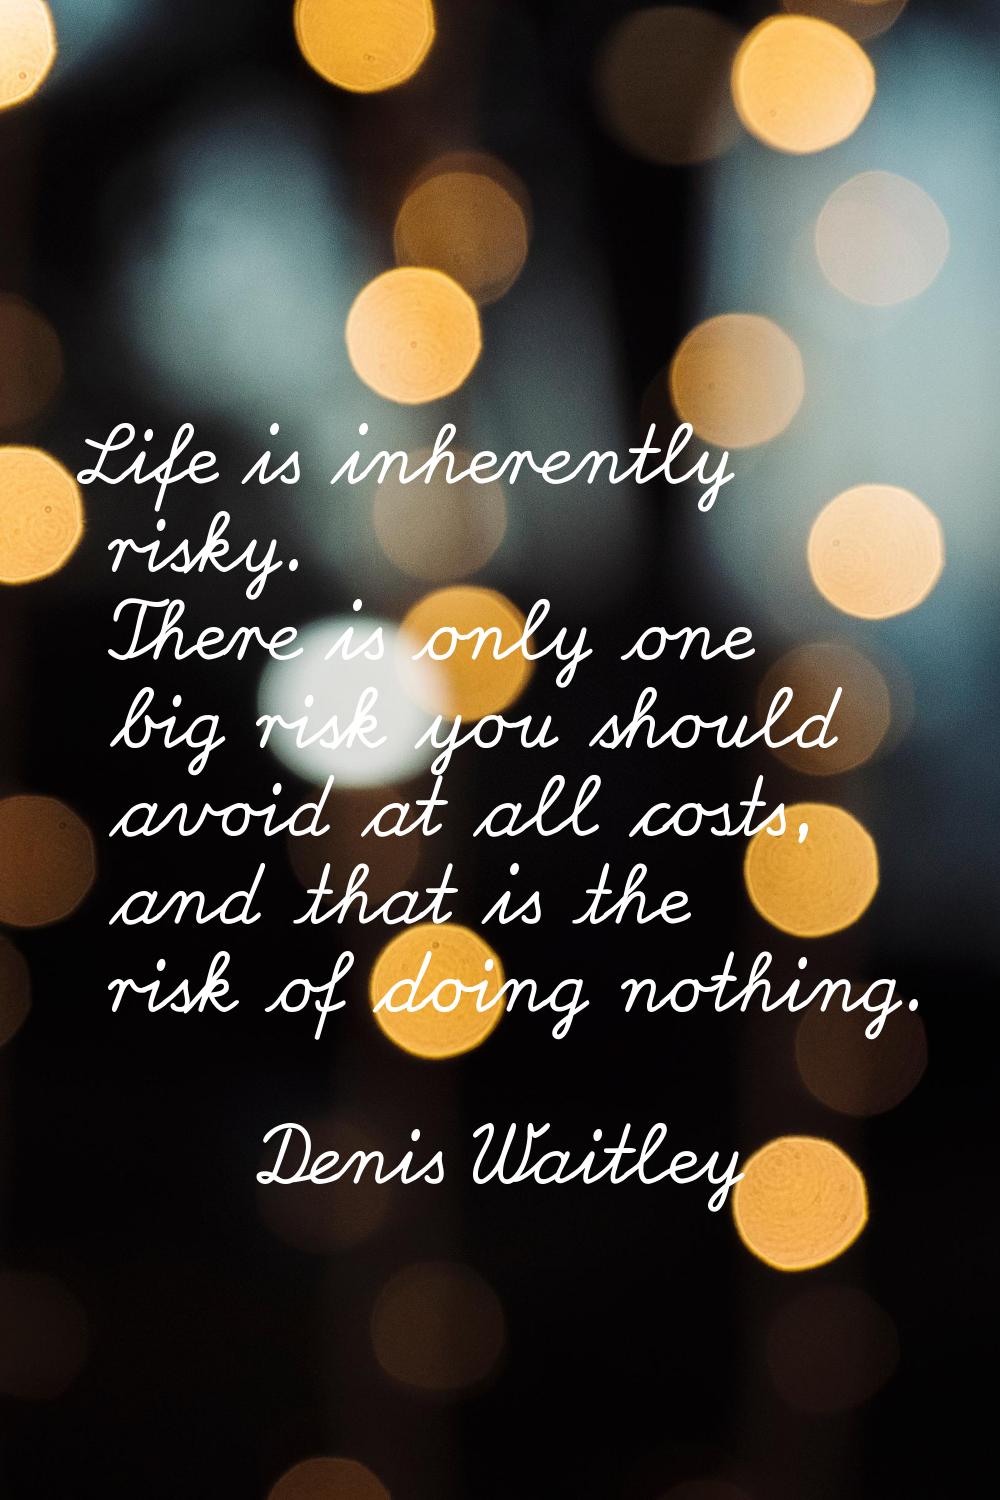 Life is inherently risky. There is only one big risk you should avoid at all costs, and that is the